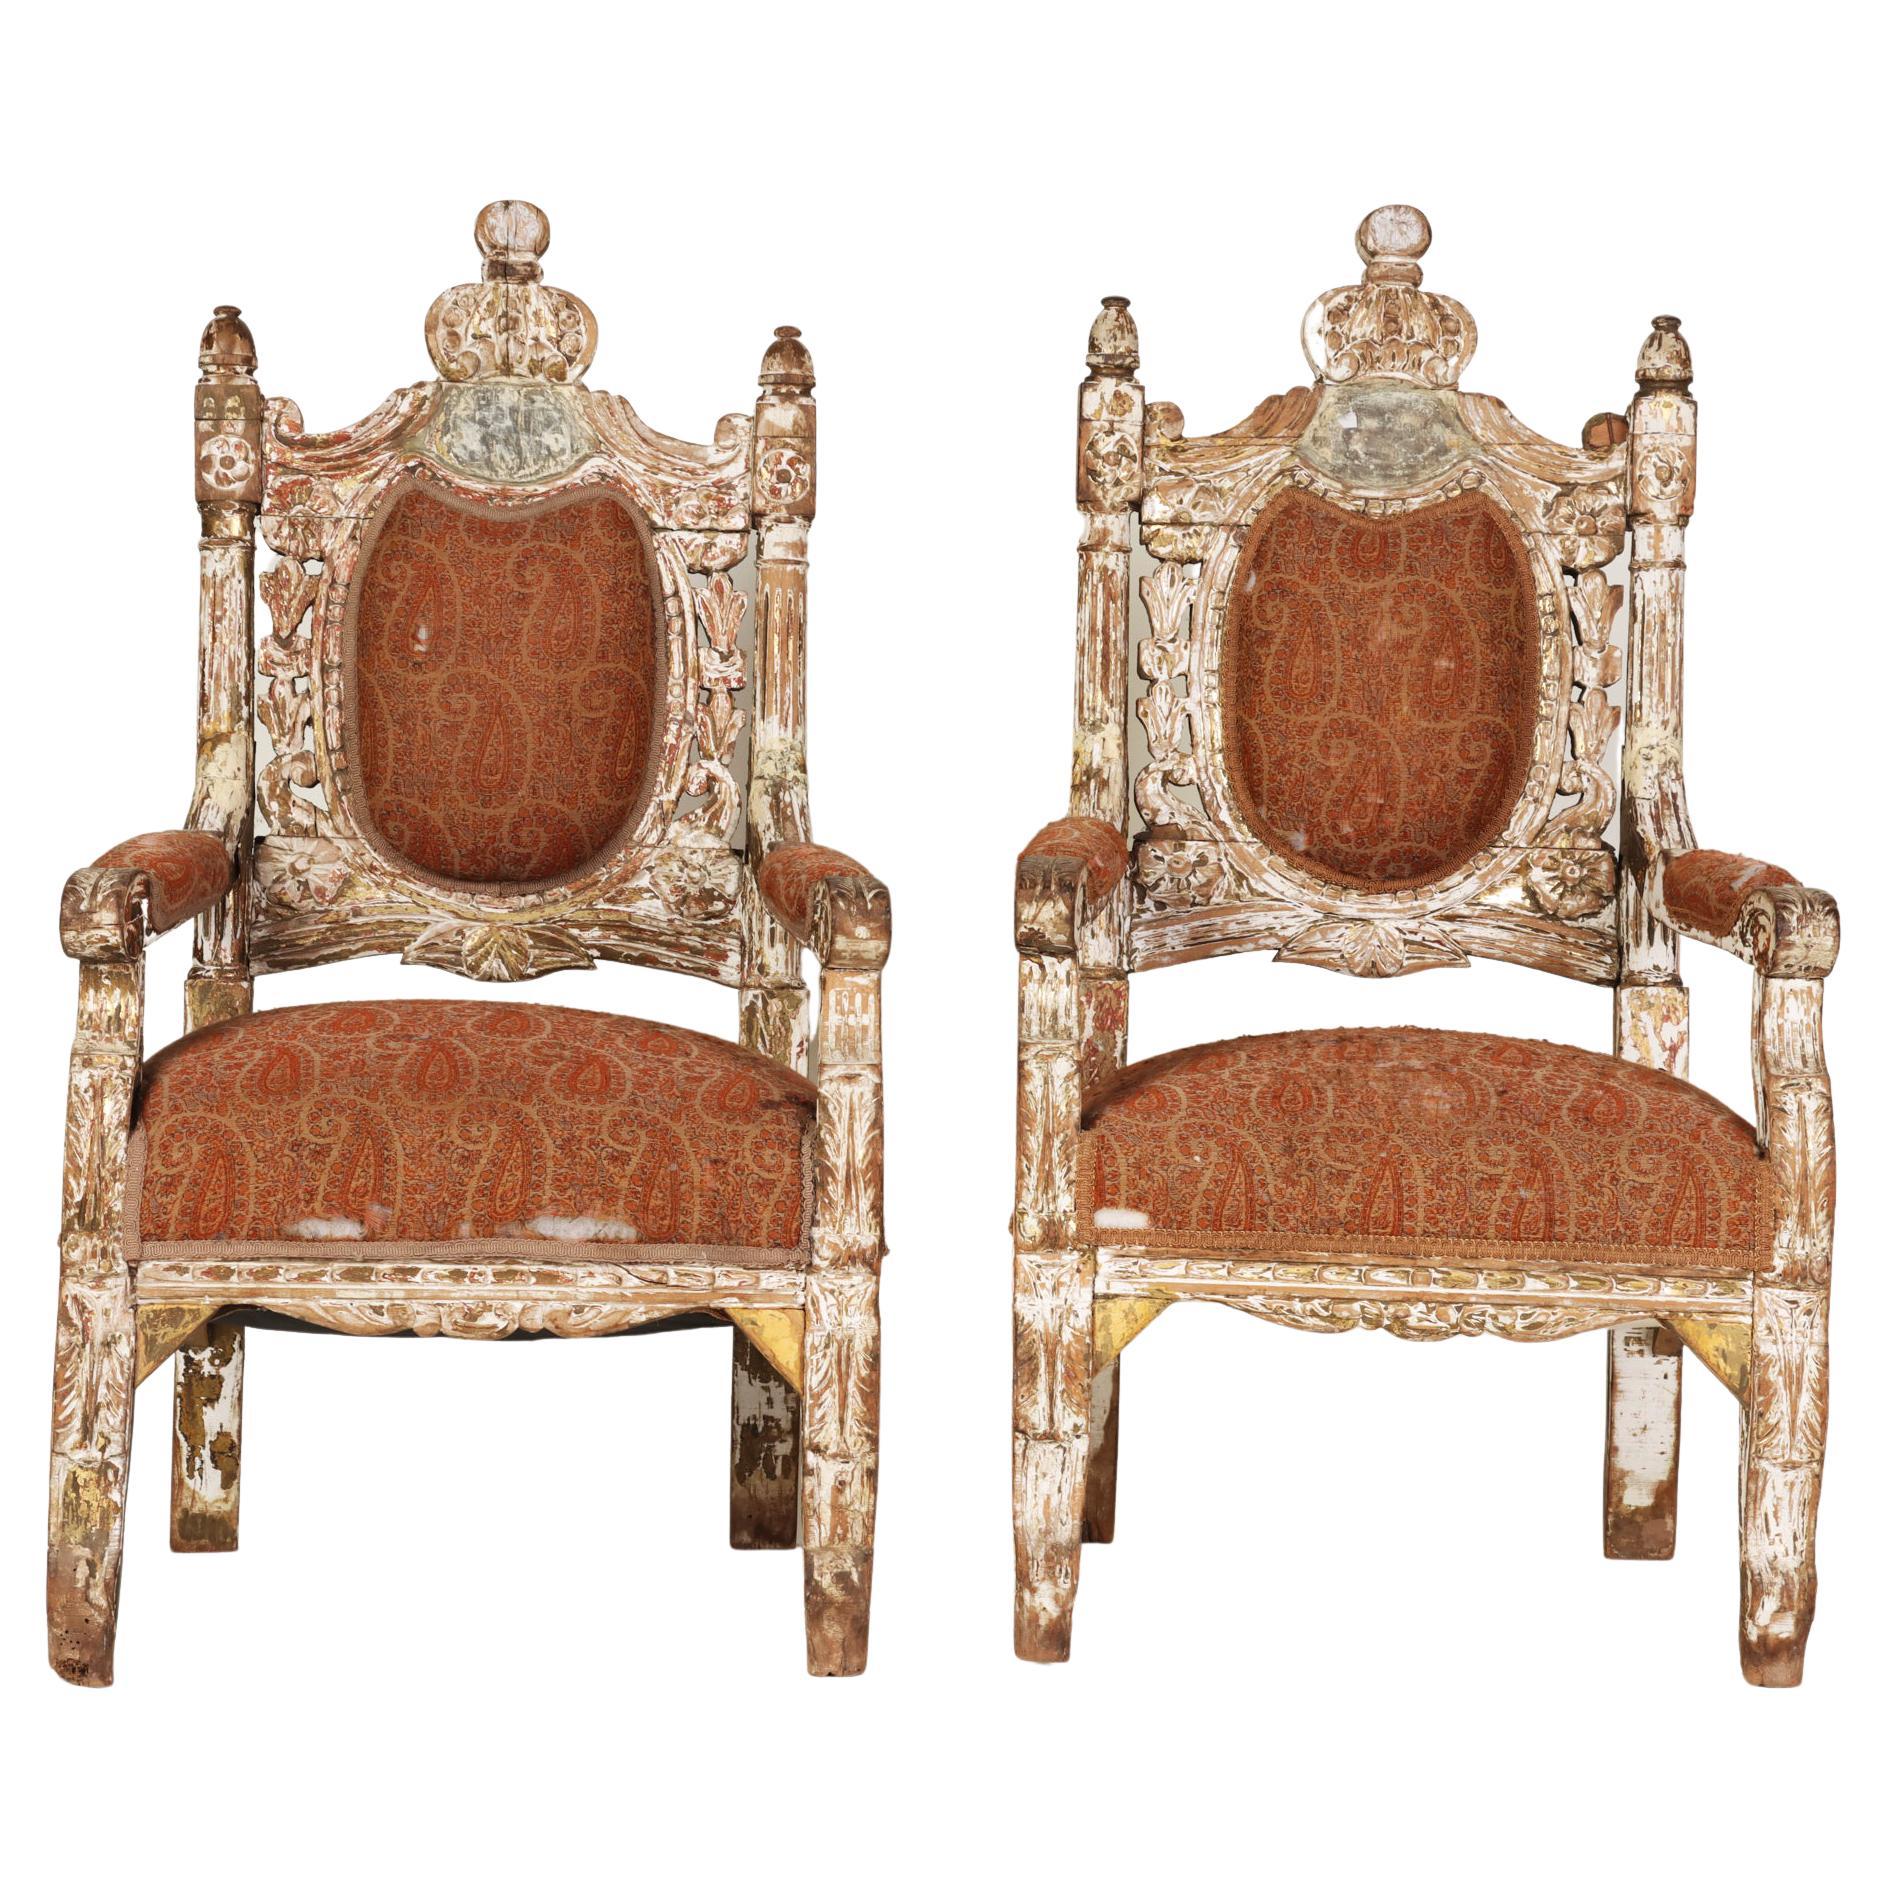 Pair of Monumental Italian Throne Style Carved Armchairs, Early 19th C